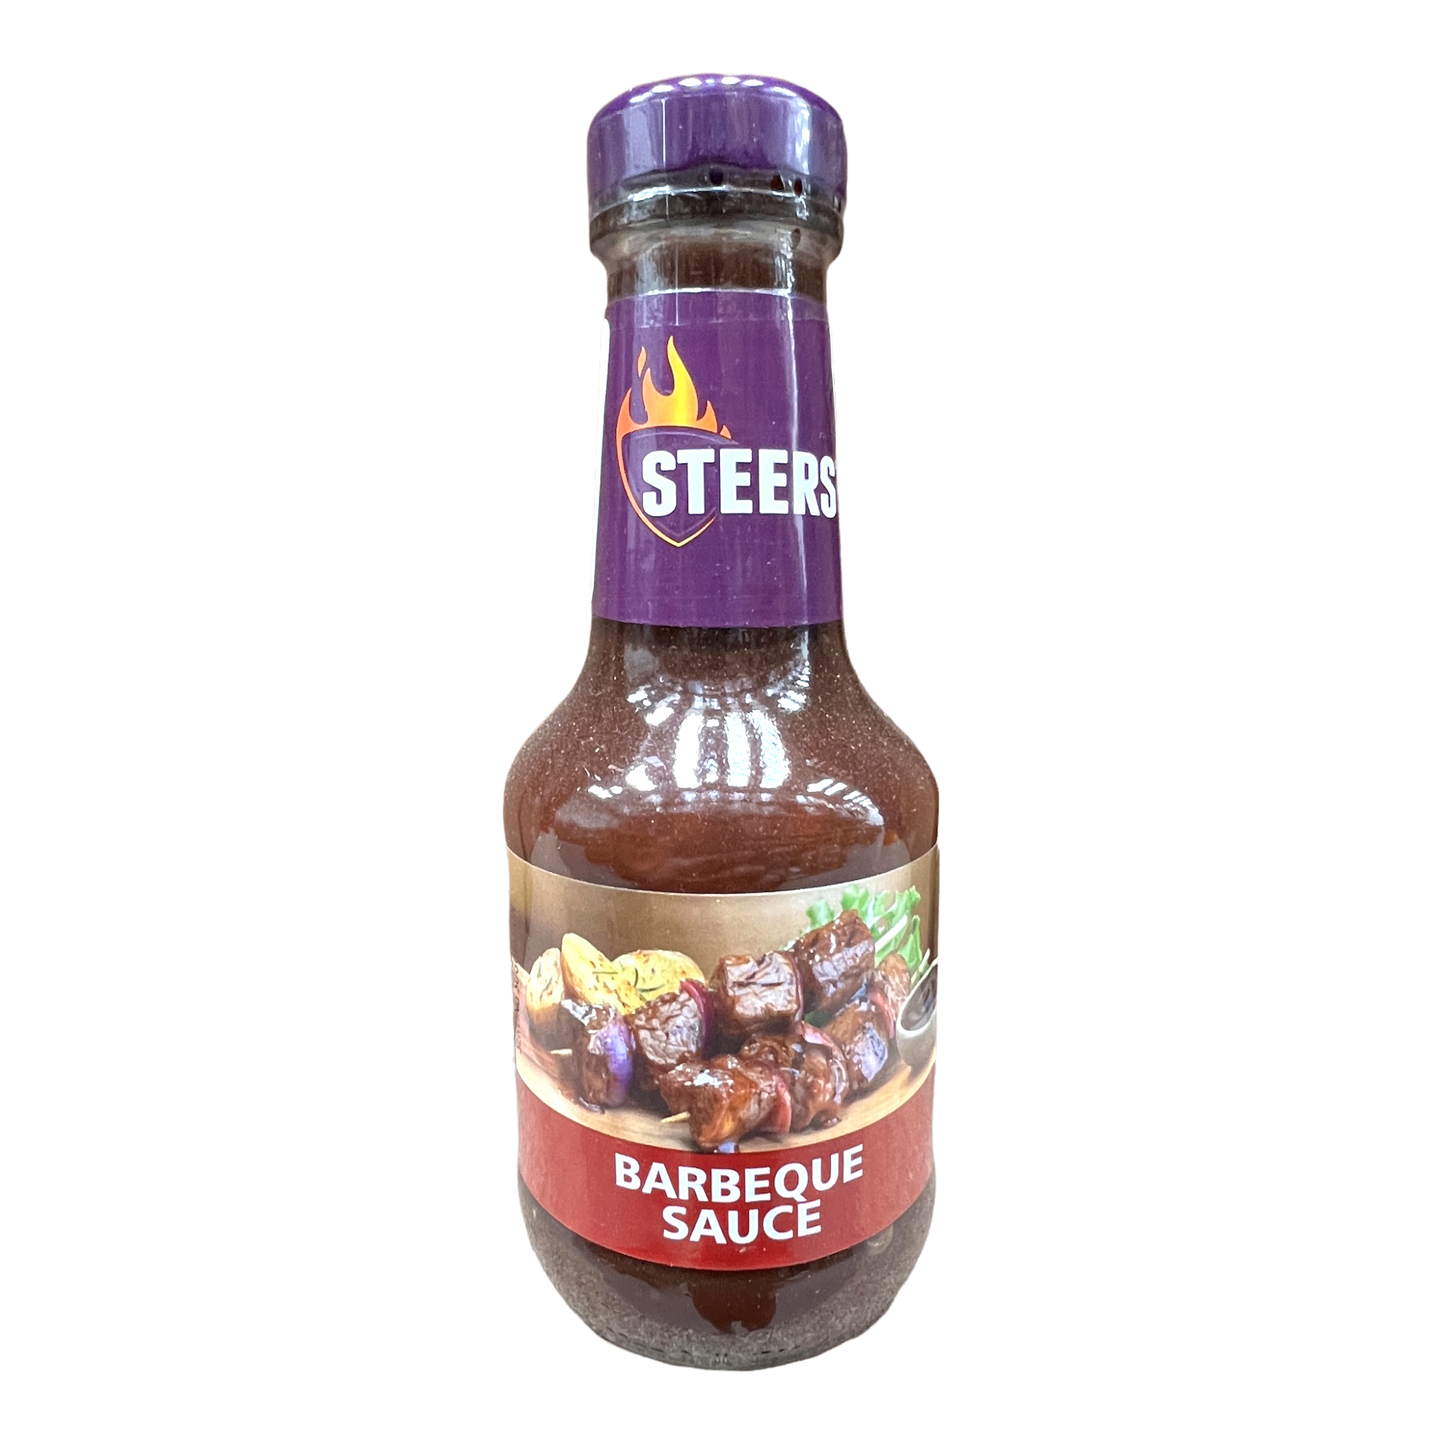 Steers Barbecue Sauce 375ml [South African]